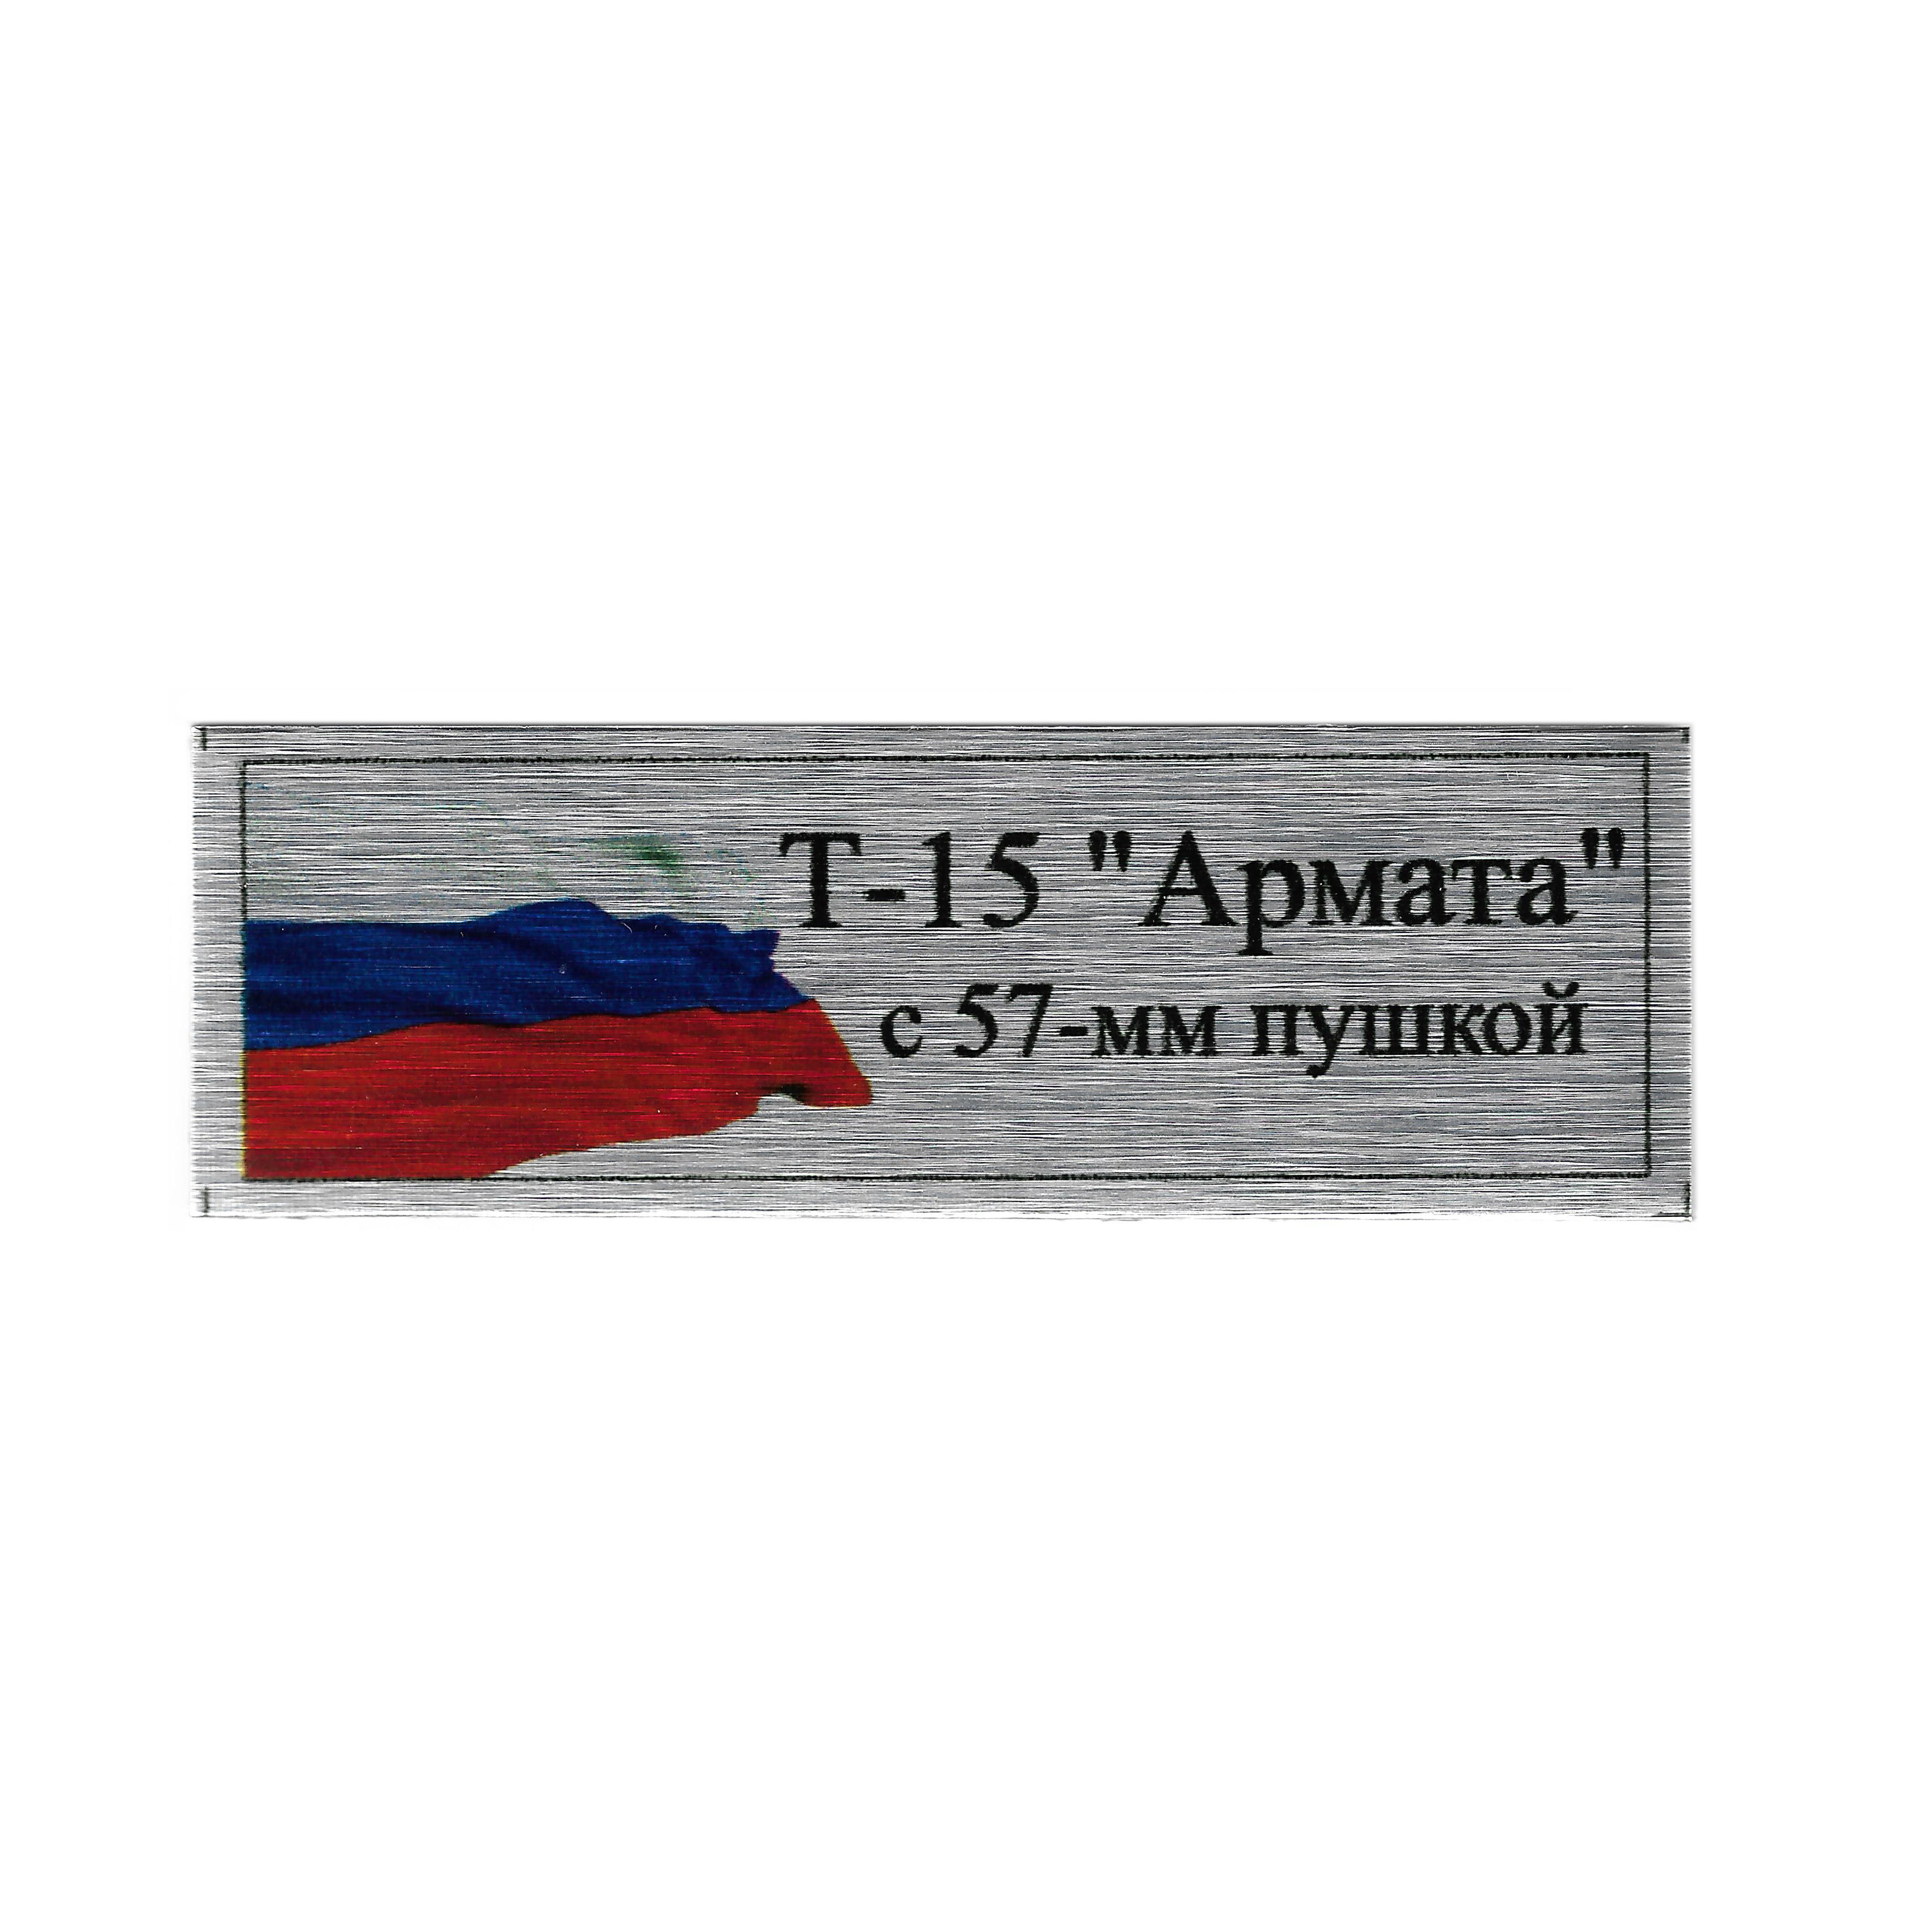 T354 Plate Plate for Russian heavy infantry fighting vehicle T15 